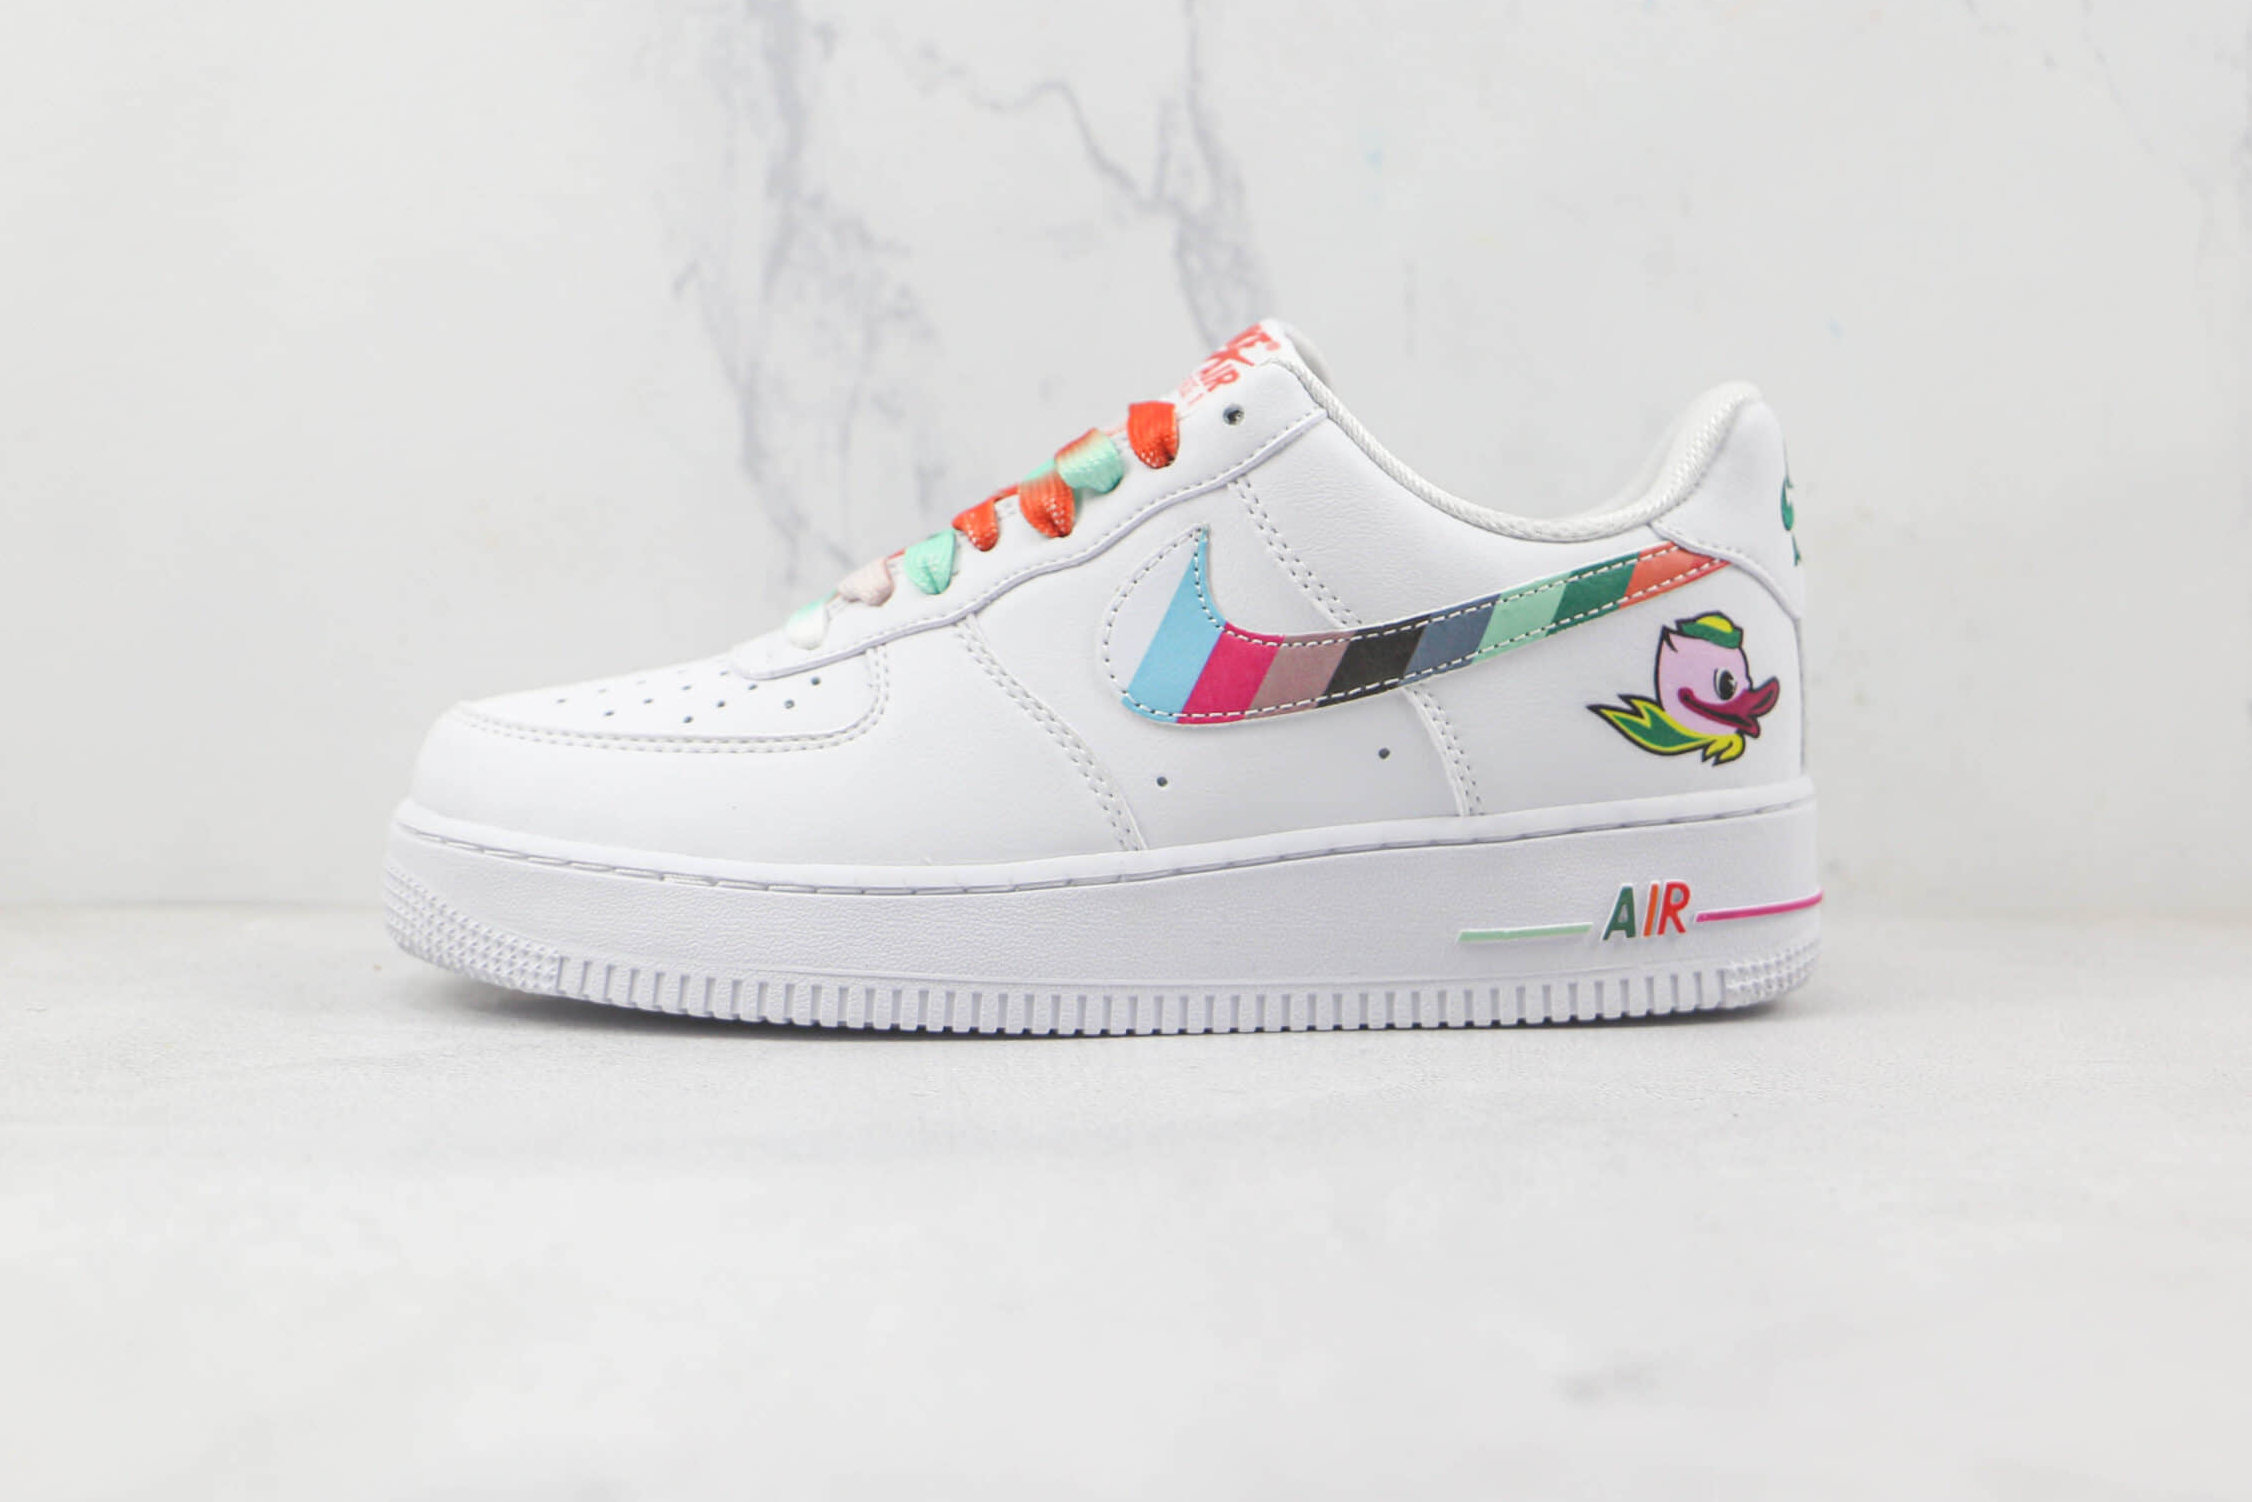 Nike Air Force 1 07 Low White Green Orange Multi-Color DH9595-100 - Shop Now